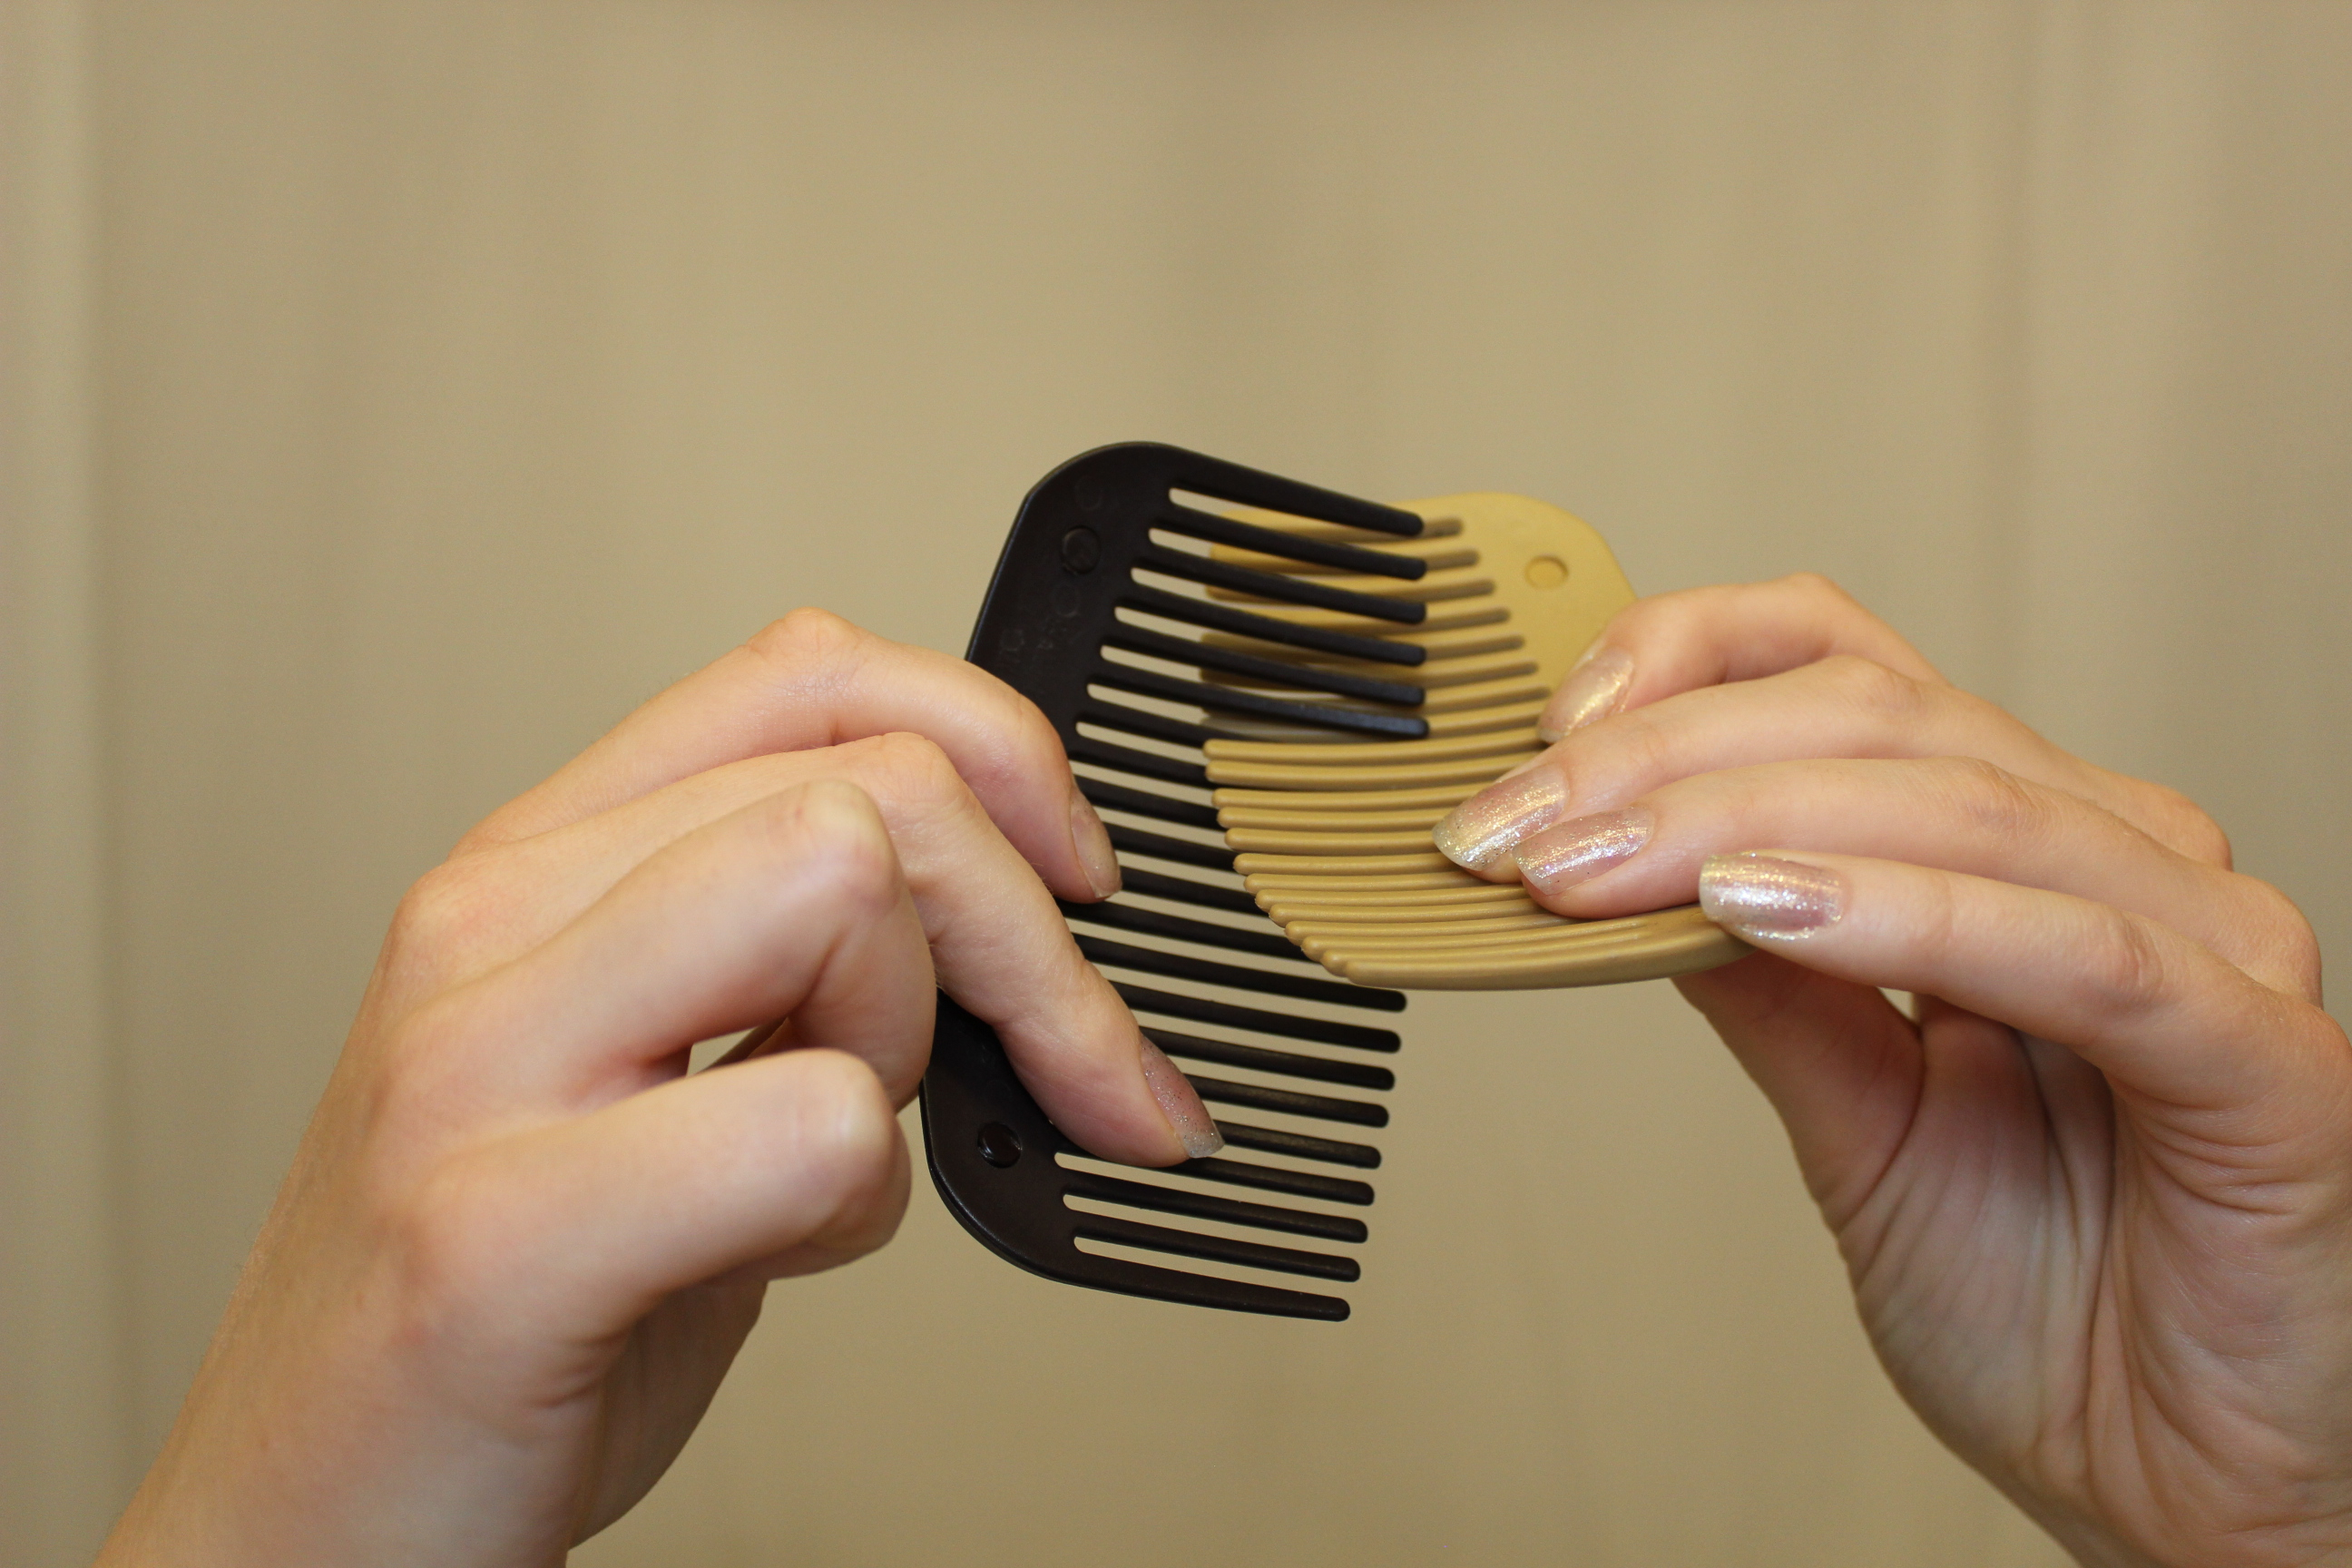 How to interlock the combs 1